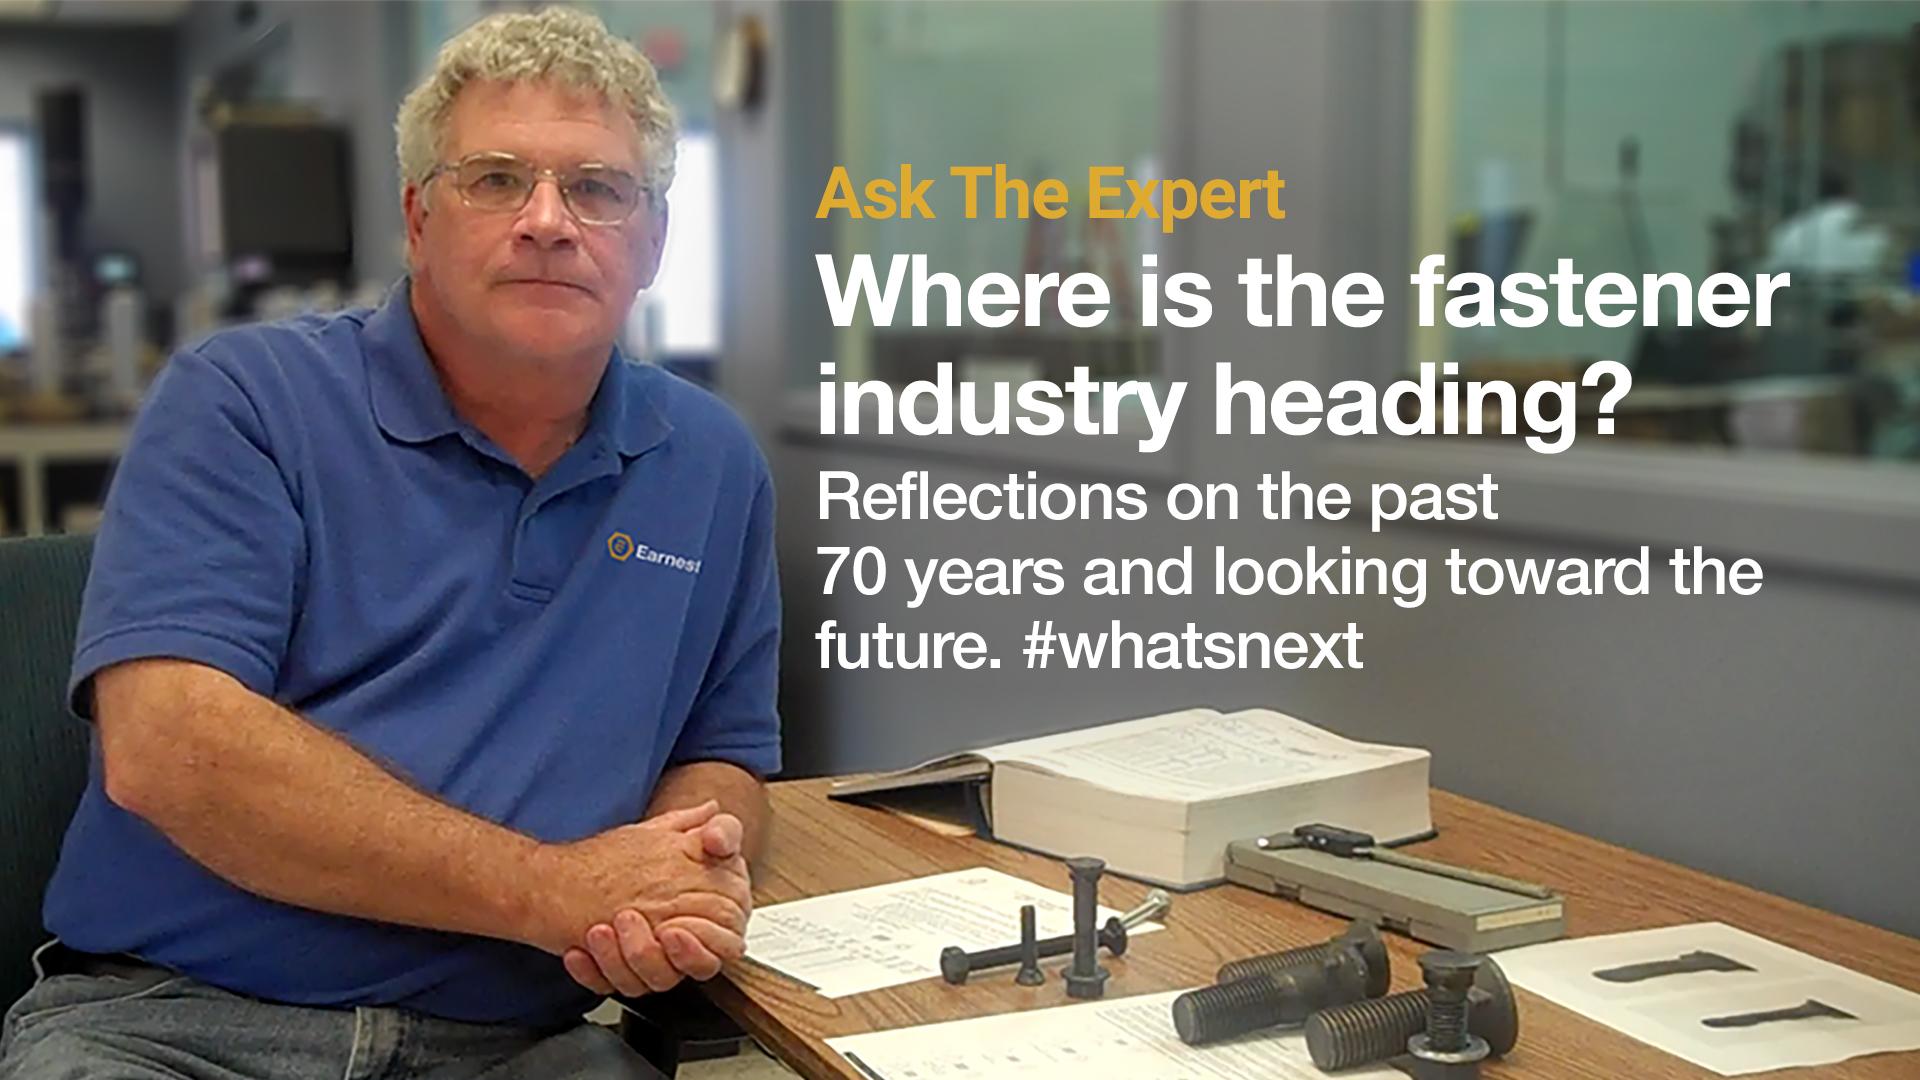 Ask the Expert: Where is the fastener industry heading?